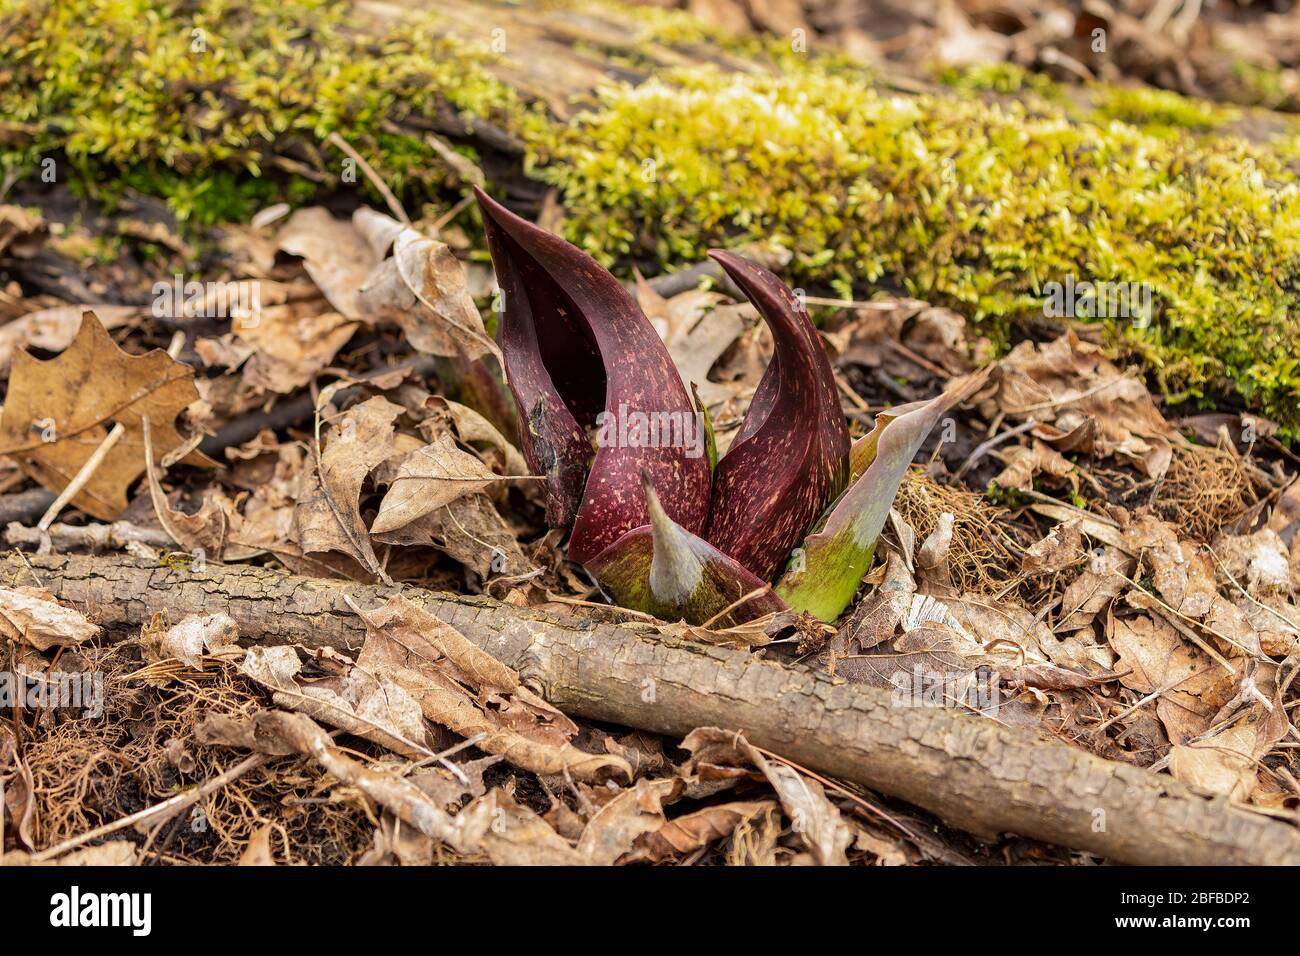 Skunk Cabbage. Wisconsin’s First Spring Flowers. Skunk Cabbage is native Wisconsin florals and one of the earliest blooming perennial wildflowers in s Stock Photo